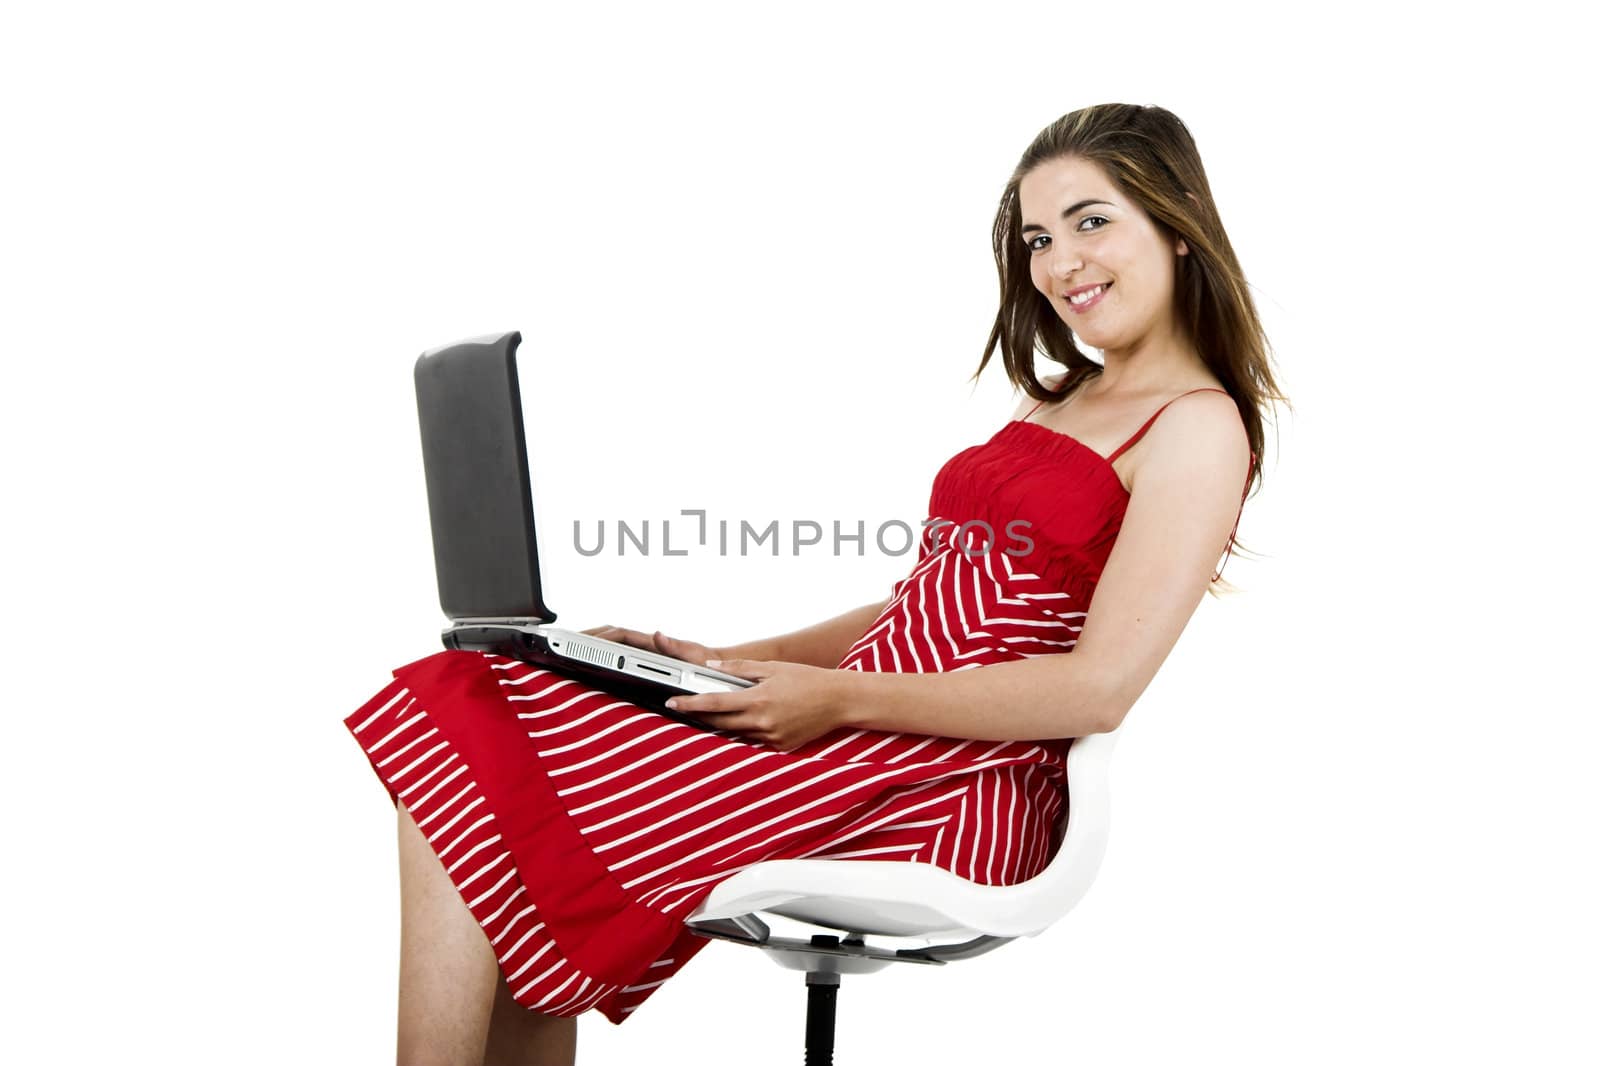 Portrait of a young beautiful woman seated on a chair with a laptop - isolated on white